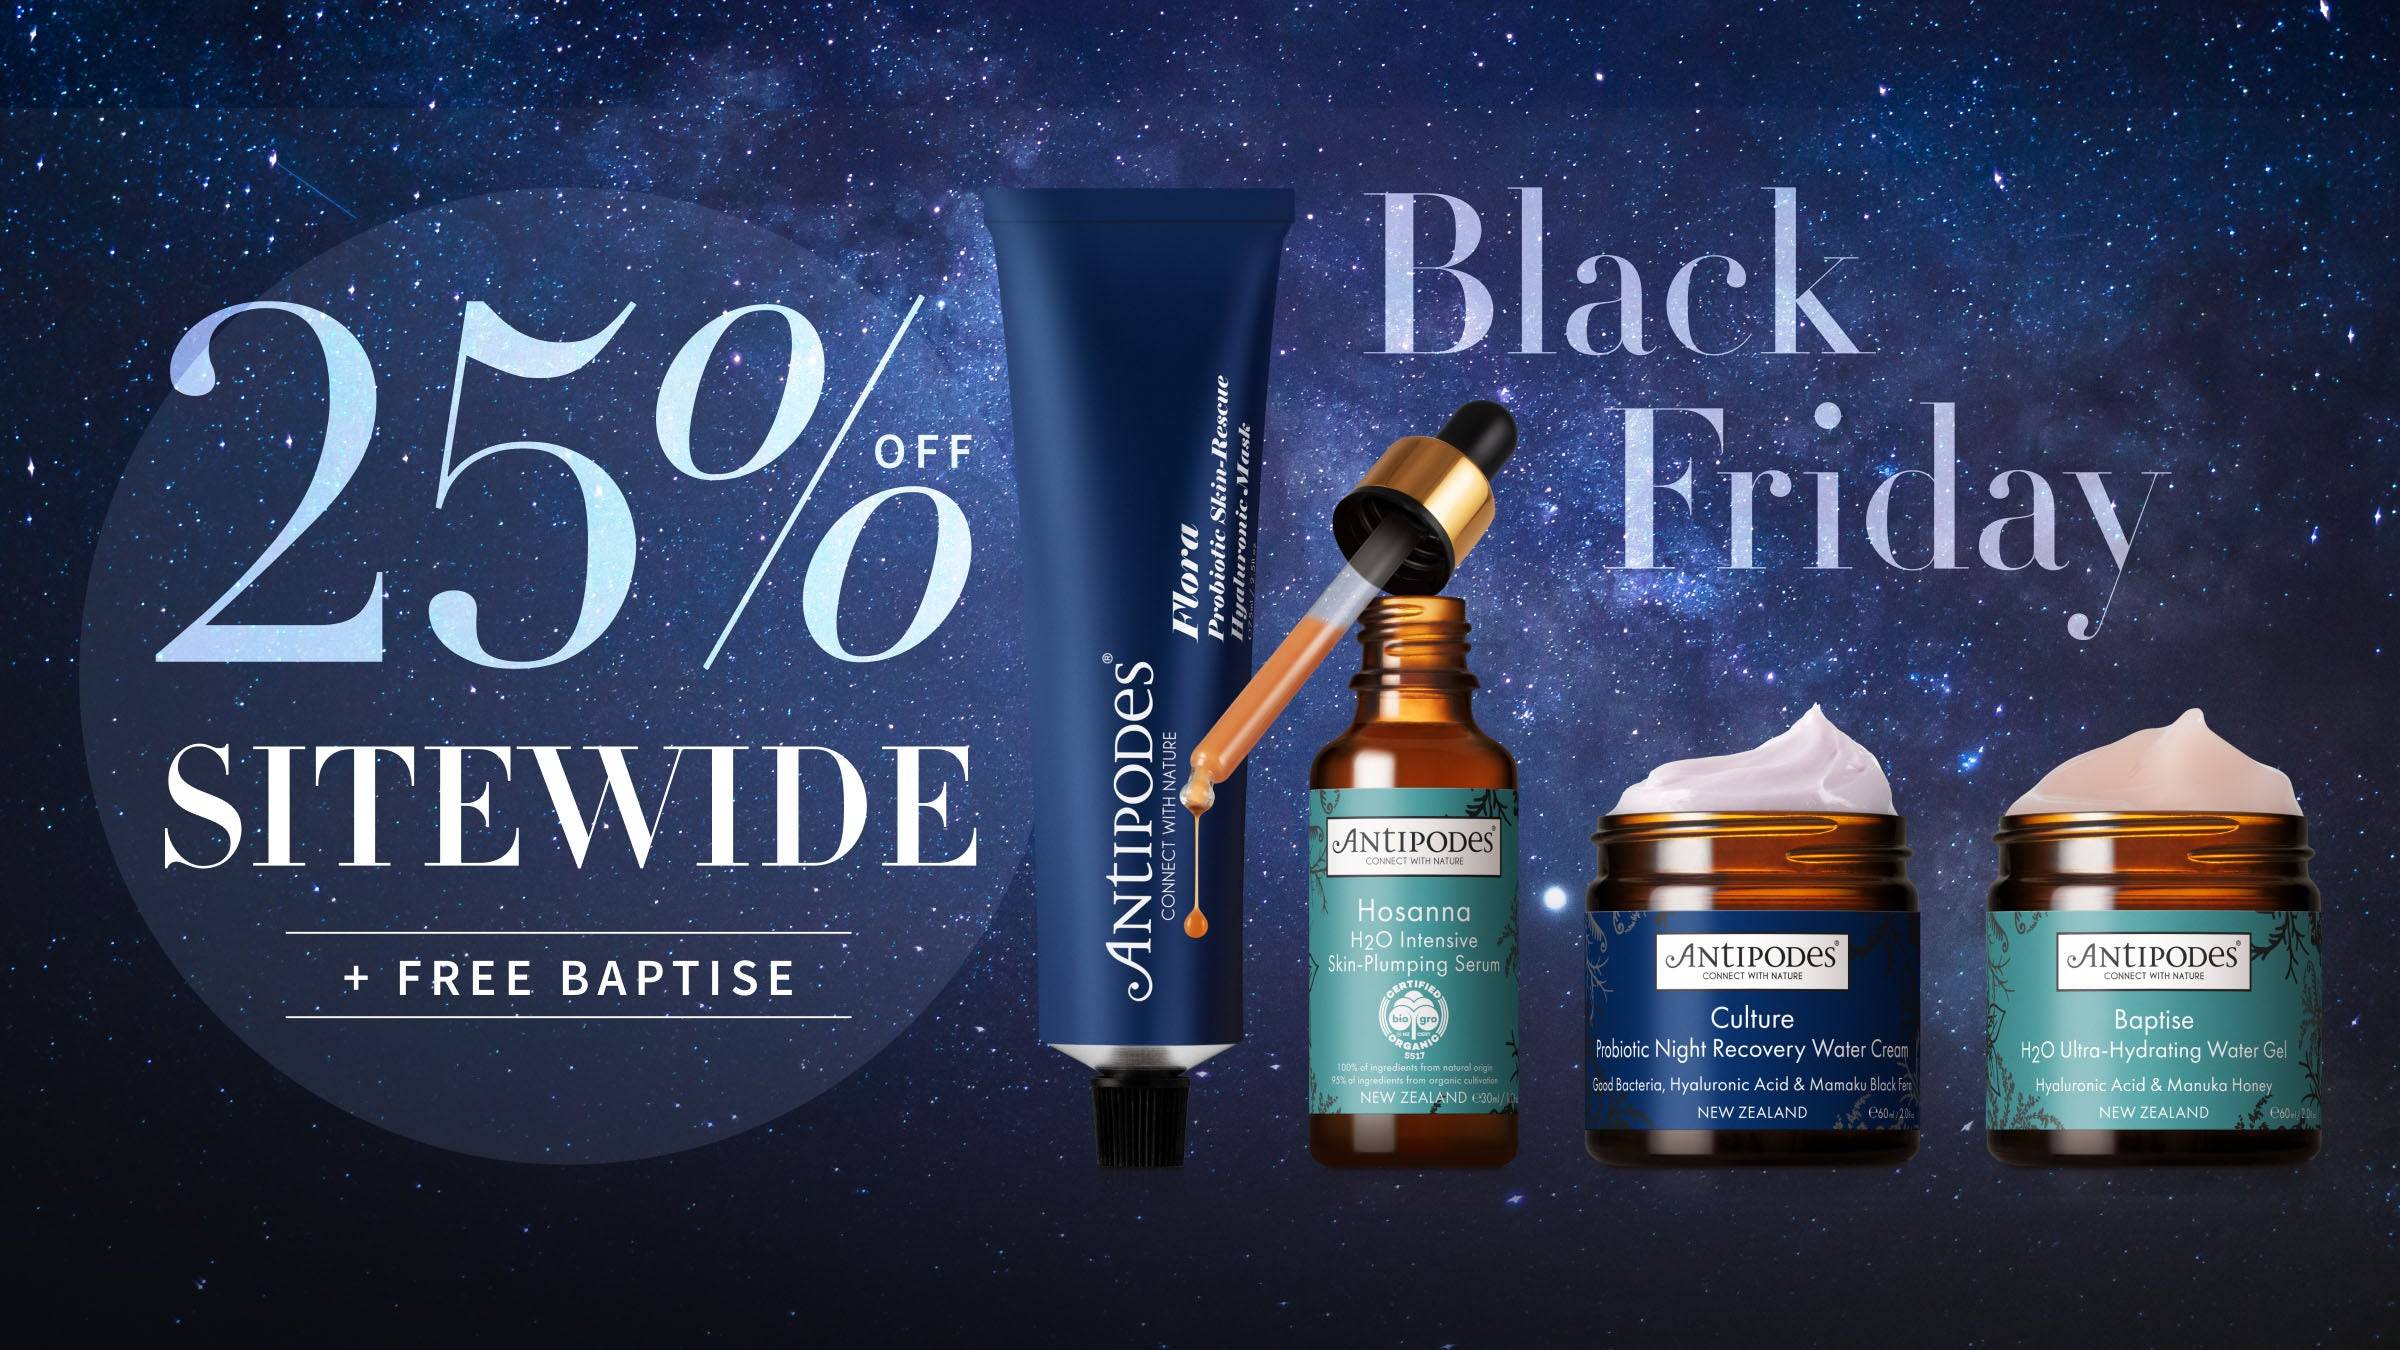 Black Friday 25% off sitewide plus free Baptise